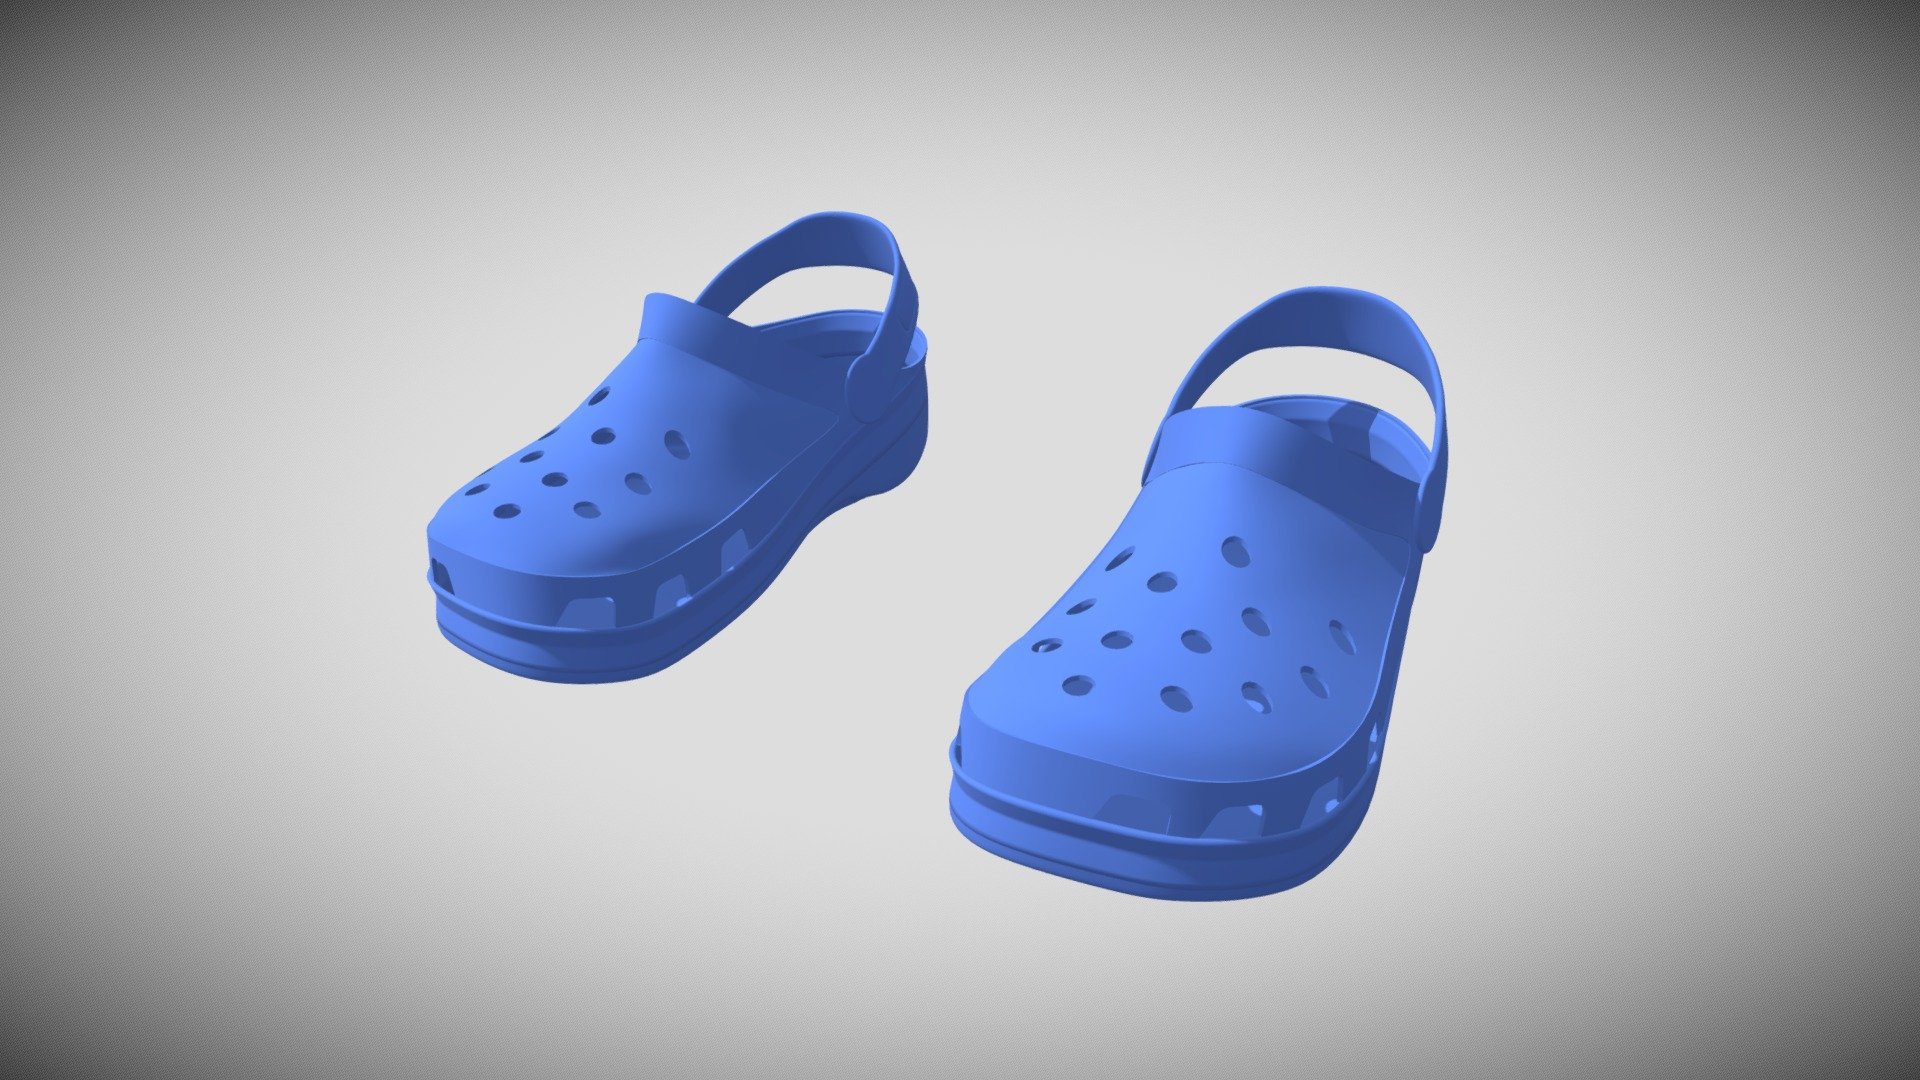 I used a Wacom graphic tablet to adjust the shape of the clogs cover 3d model